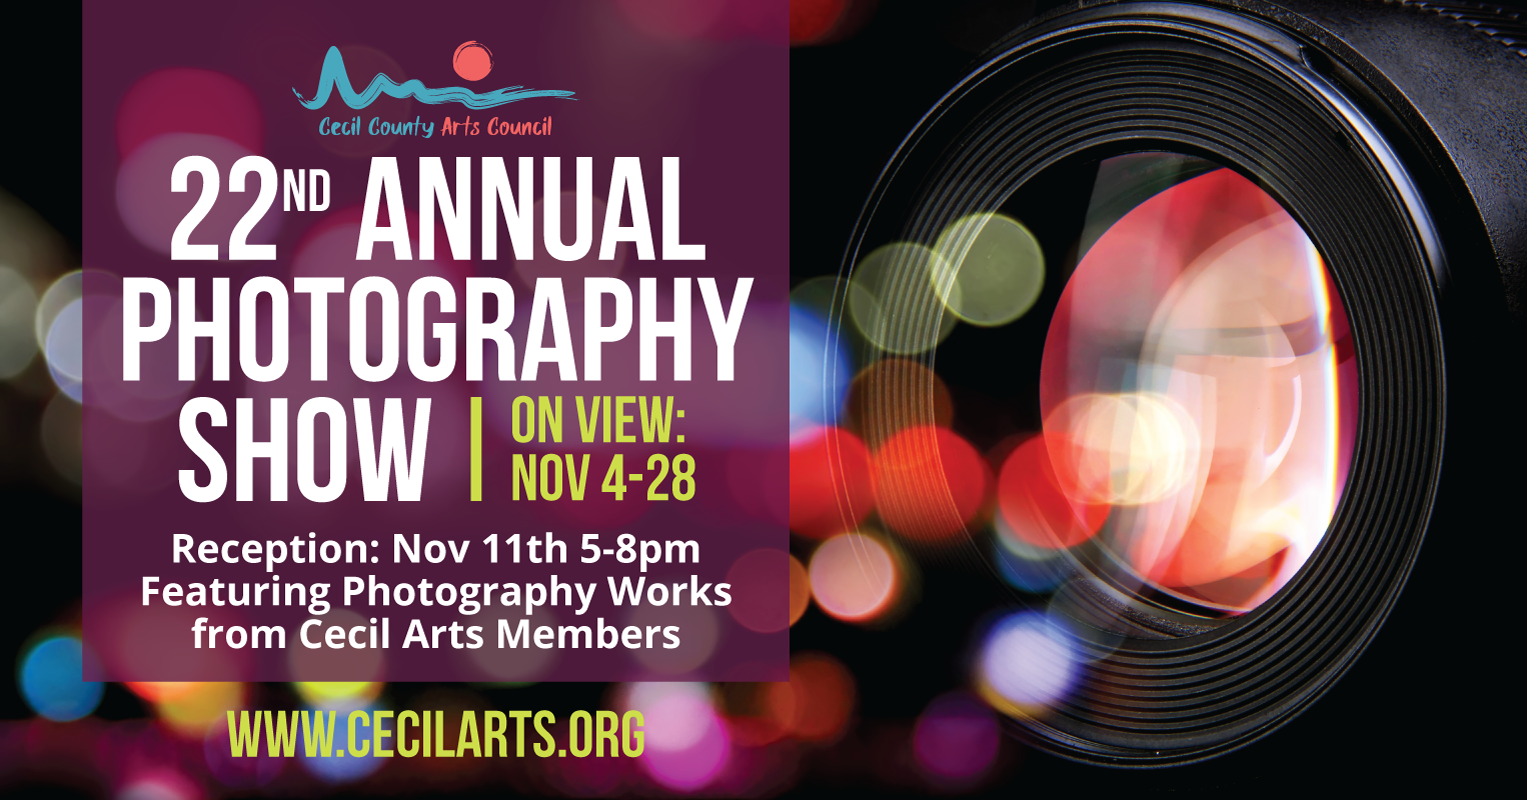 22nd Annual Photography Show - Cecil County Arts Council - Maryland Art